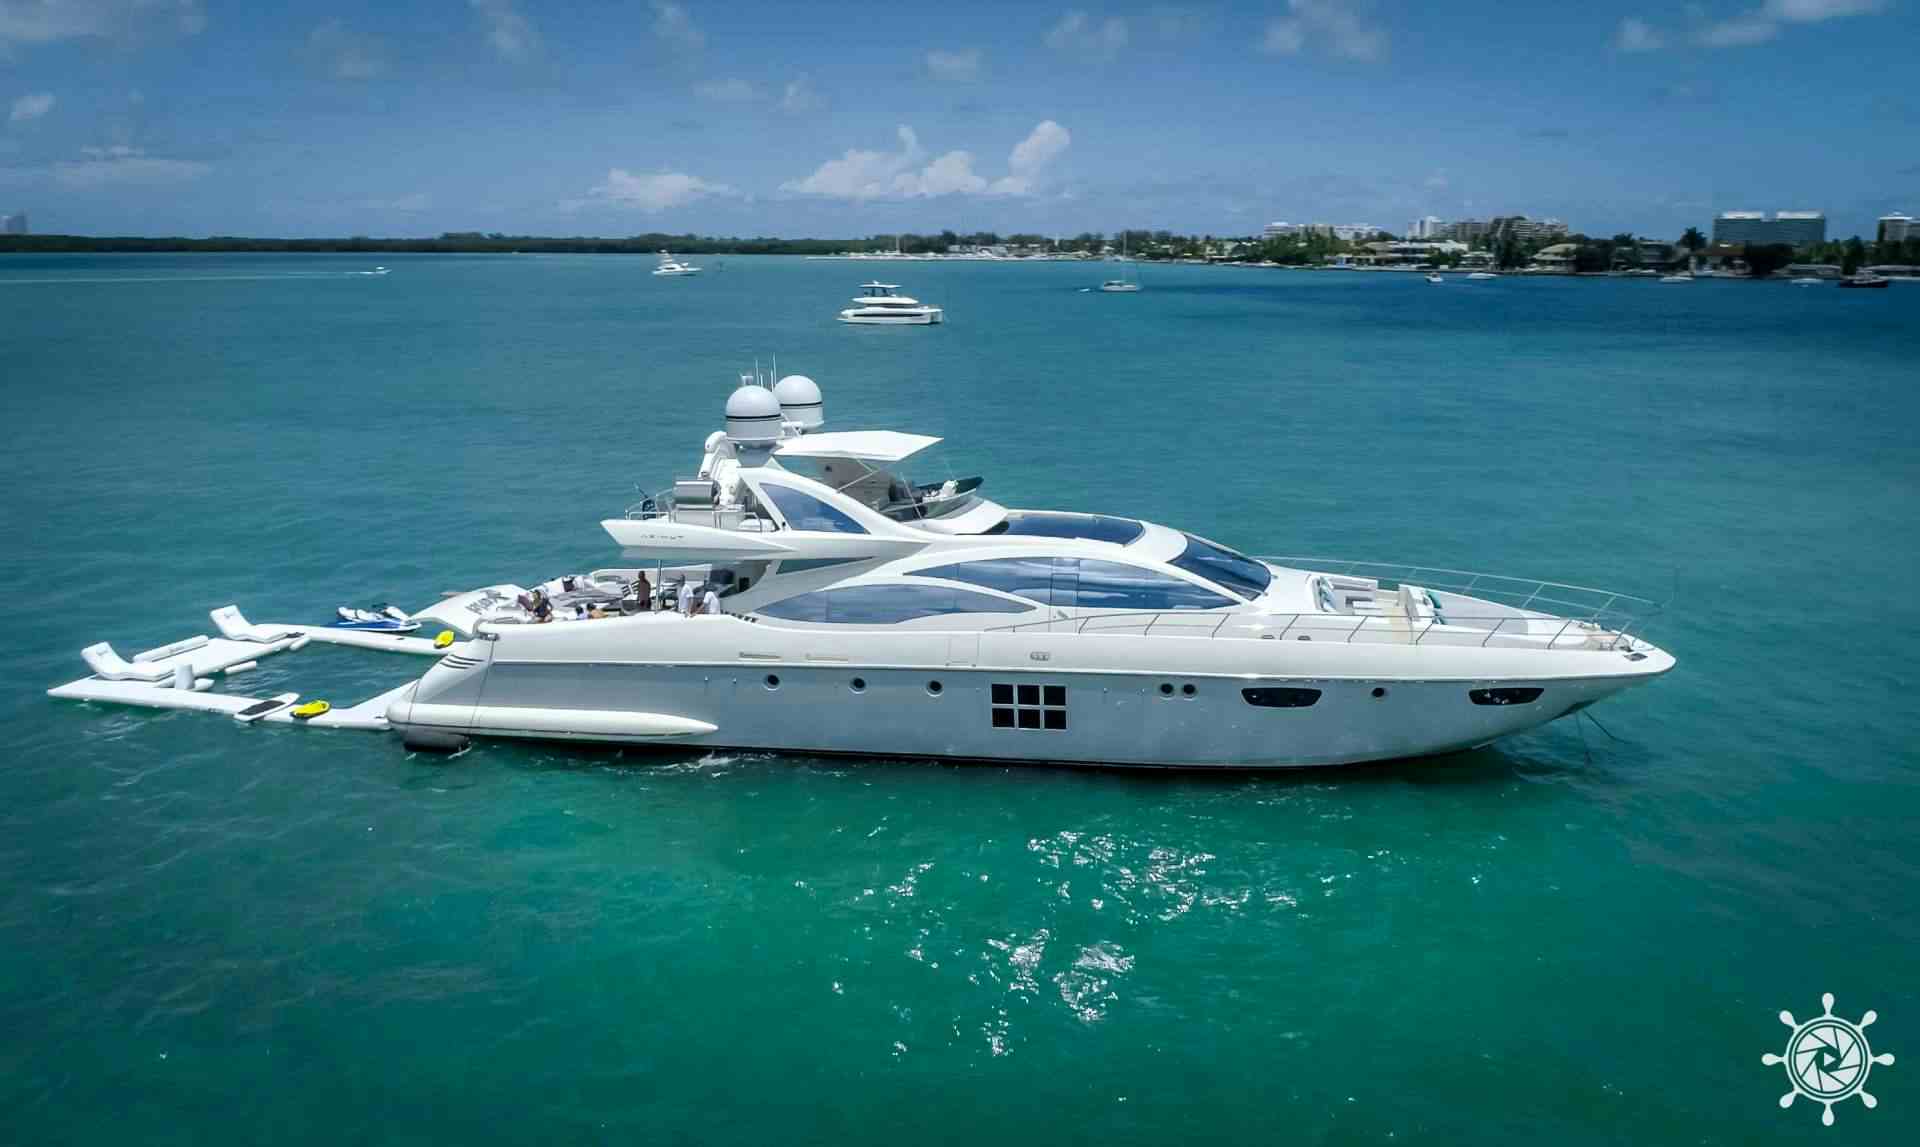 Scarlet - Yacht Charter Annapolis & Boat hire in US East Coast, Bahamas & Mexico 1